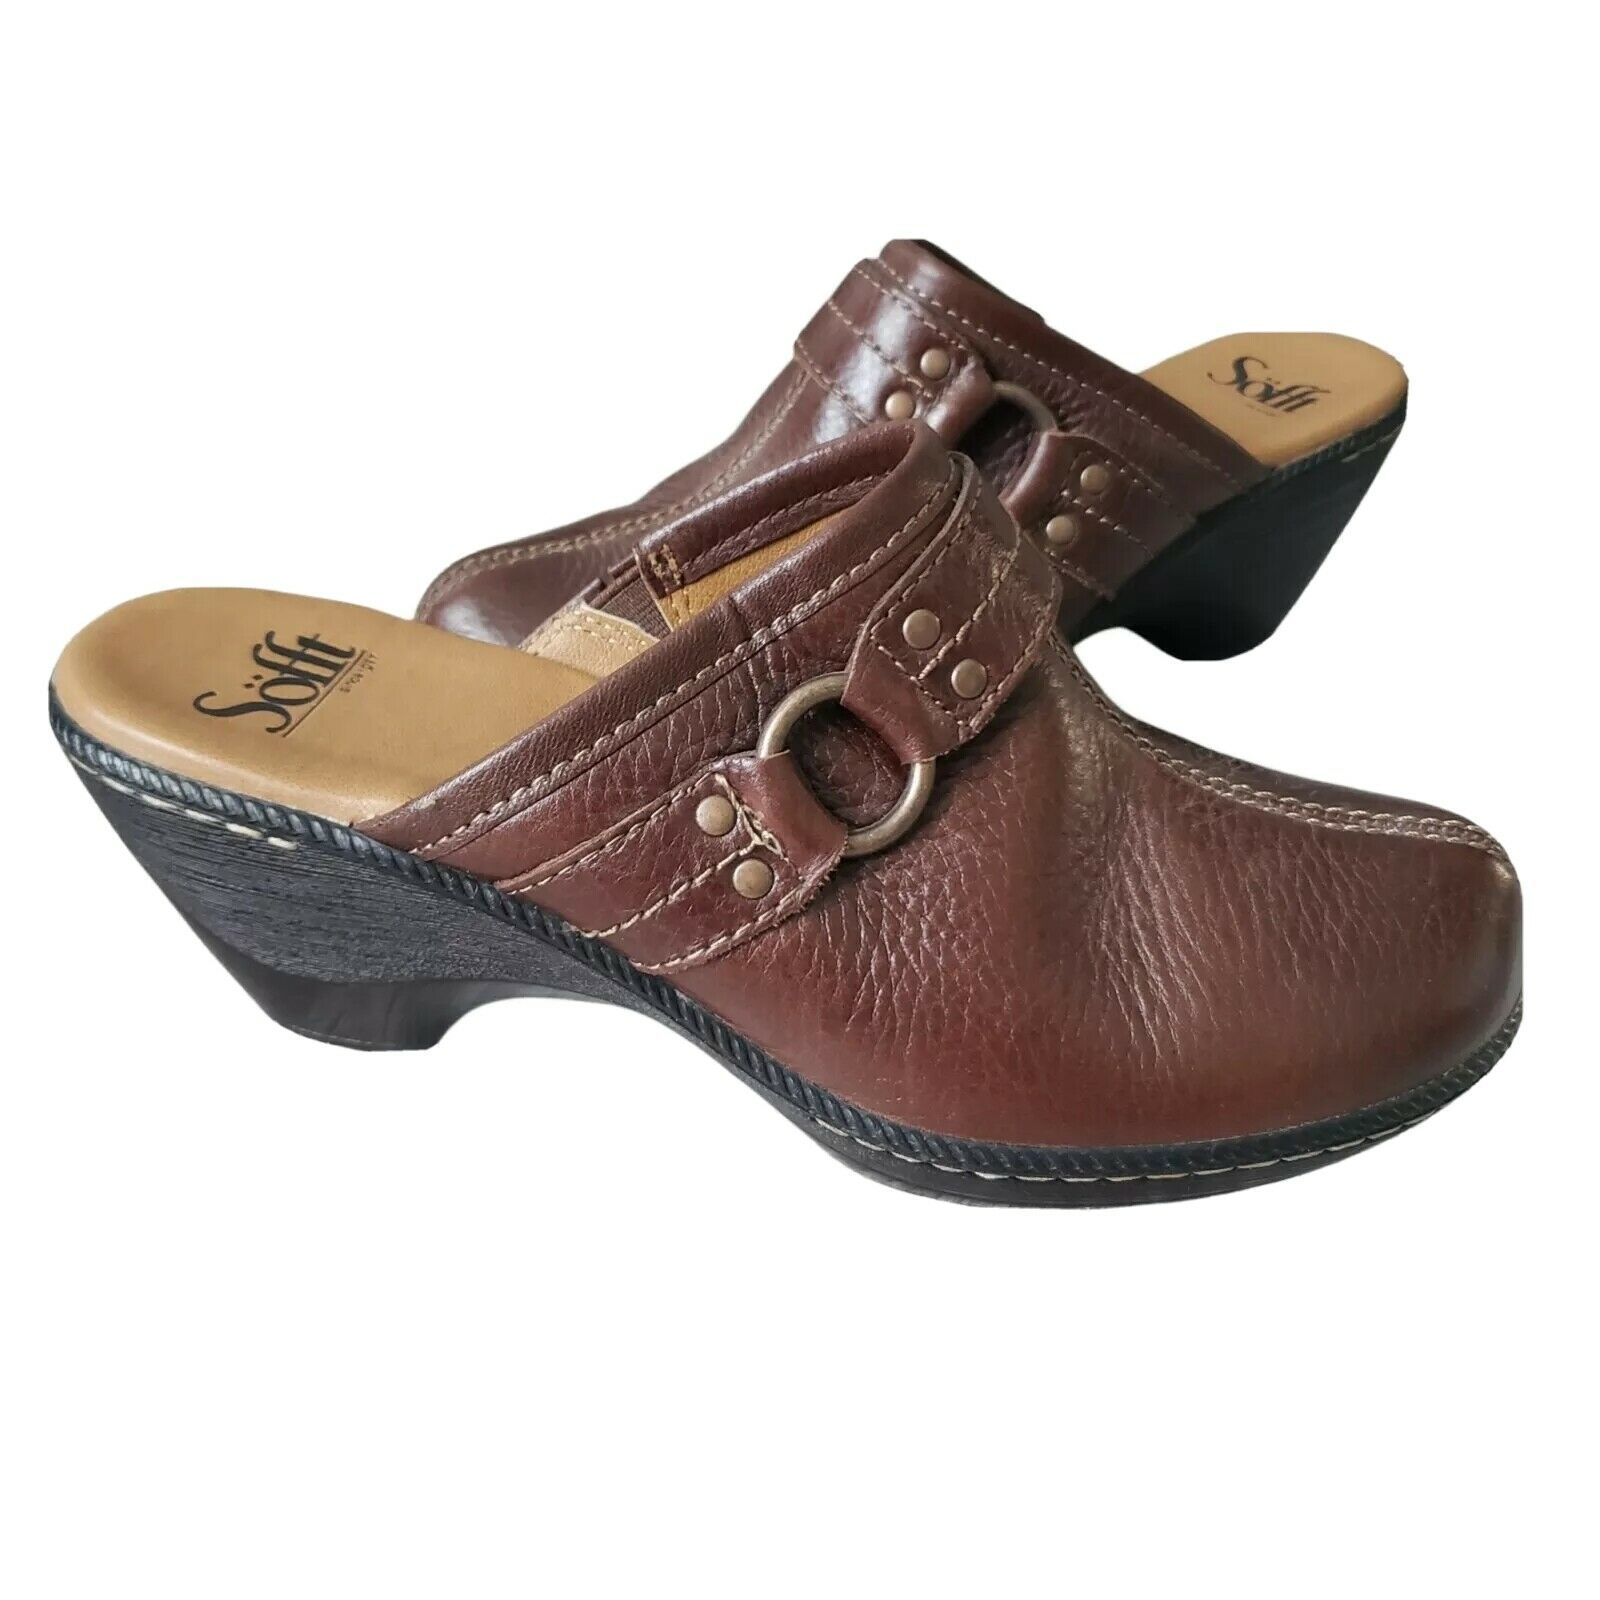 Primary image for Sofft Womens Camden 1062700 Brown Solid Leather Almonds Toe Mule Shoes Size 7.5M